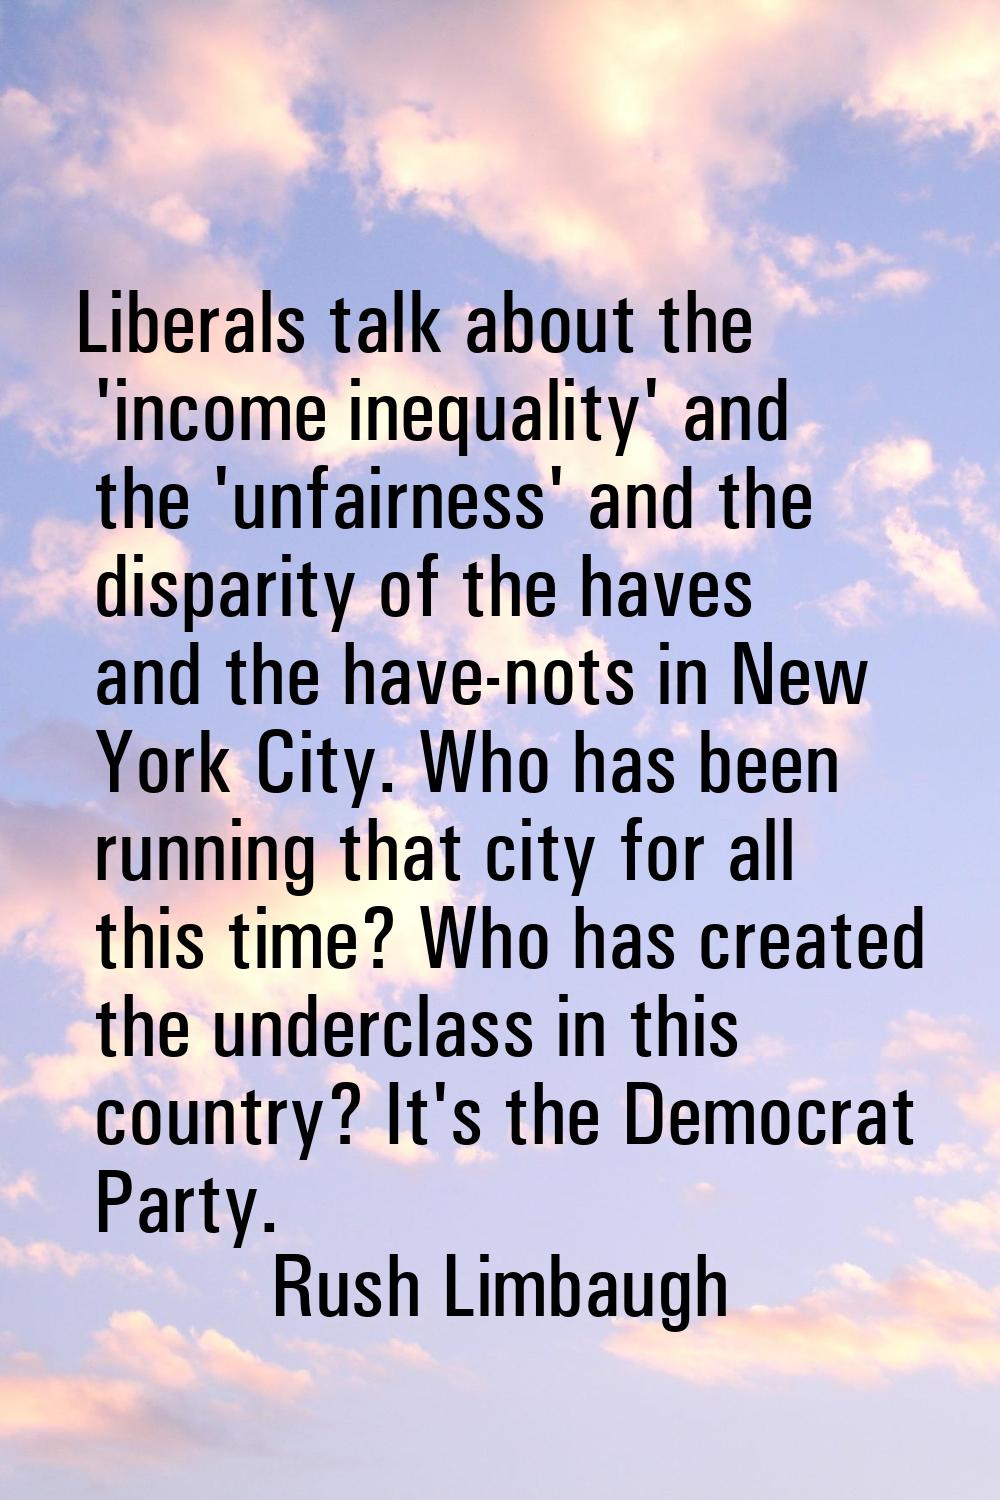 Liberals talk about the 'income inequality' and the 'unfairness' and the disparity of the haves and